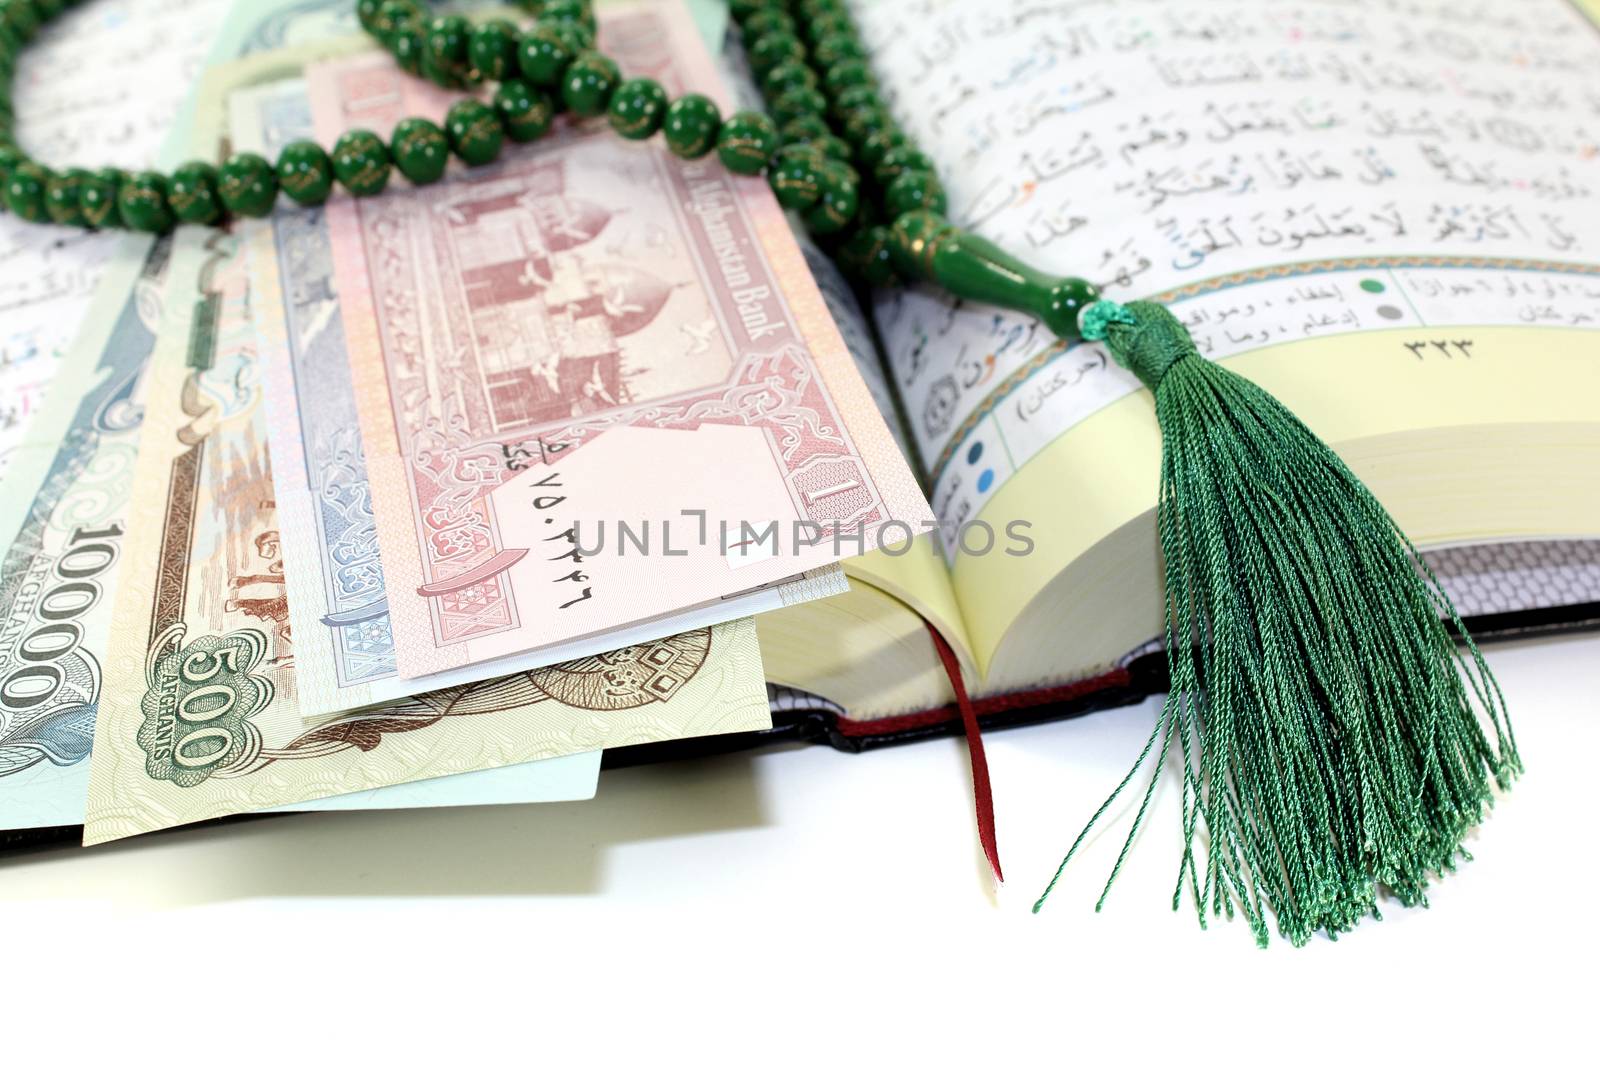 whipped Quran with afghanistanischer currency before light background